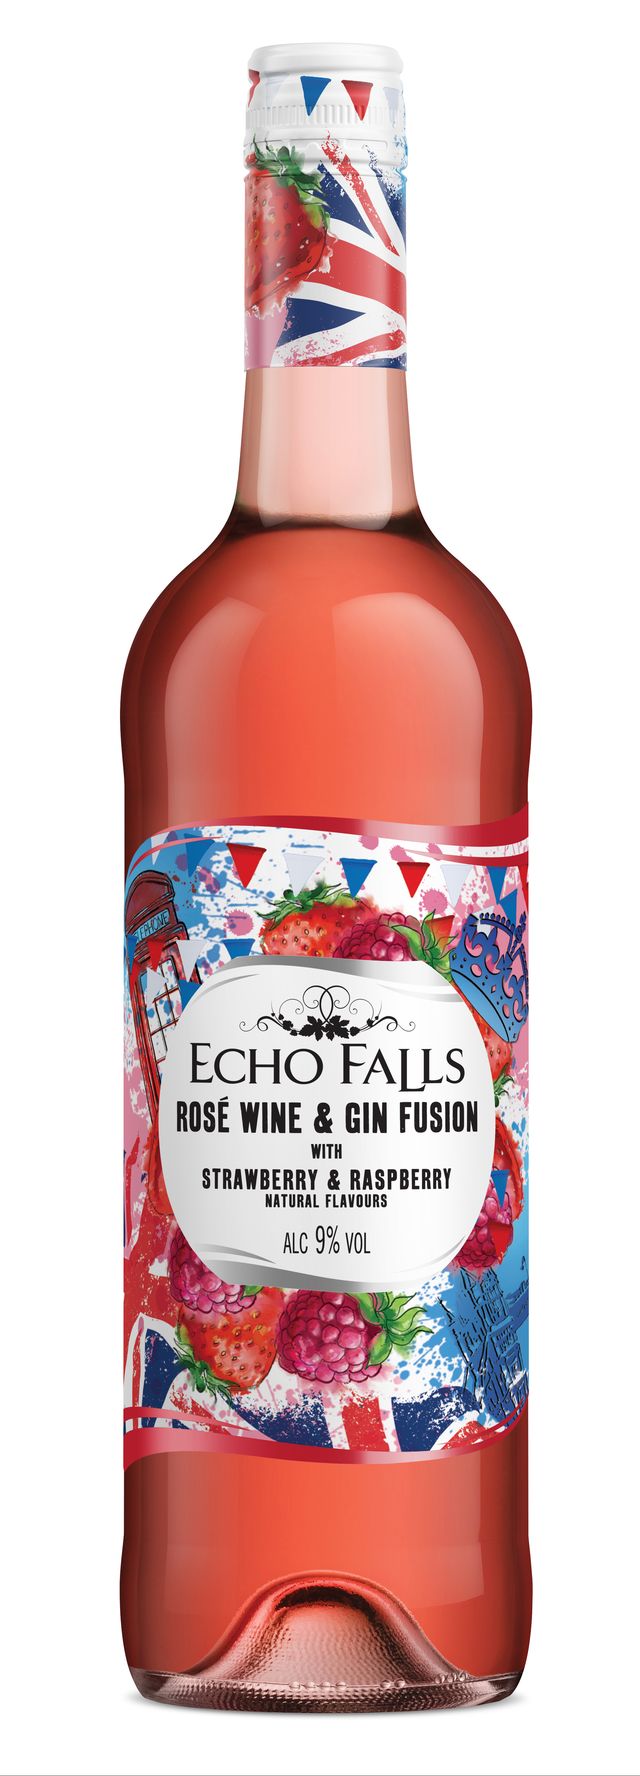 Echo Falls Rose Wine and Gin Fusion